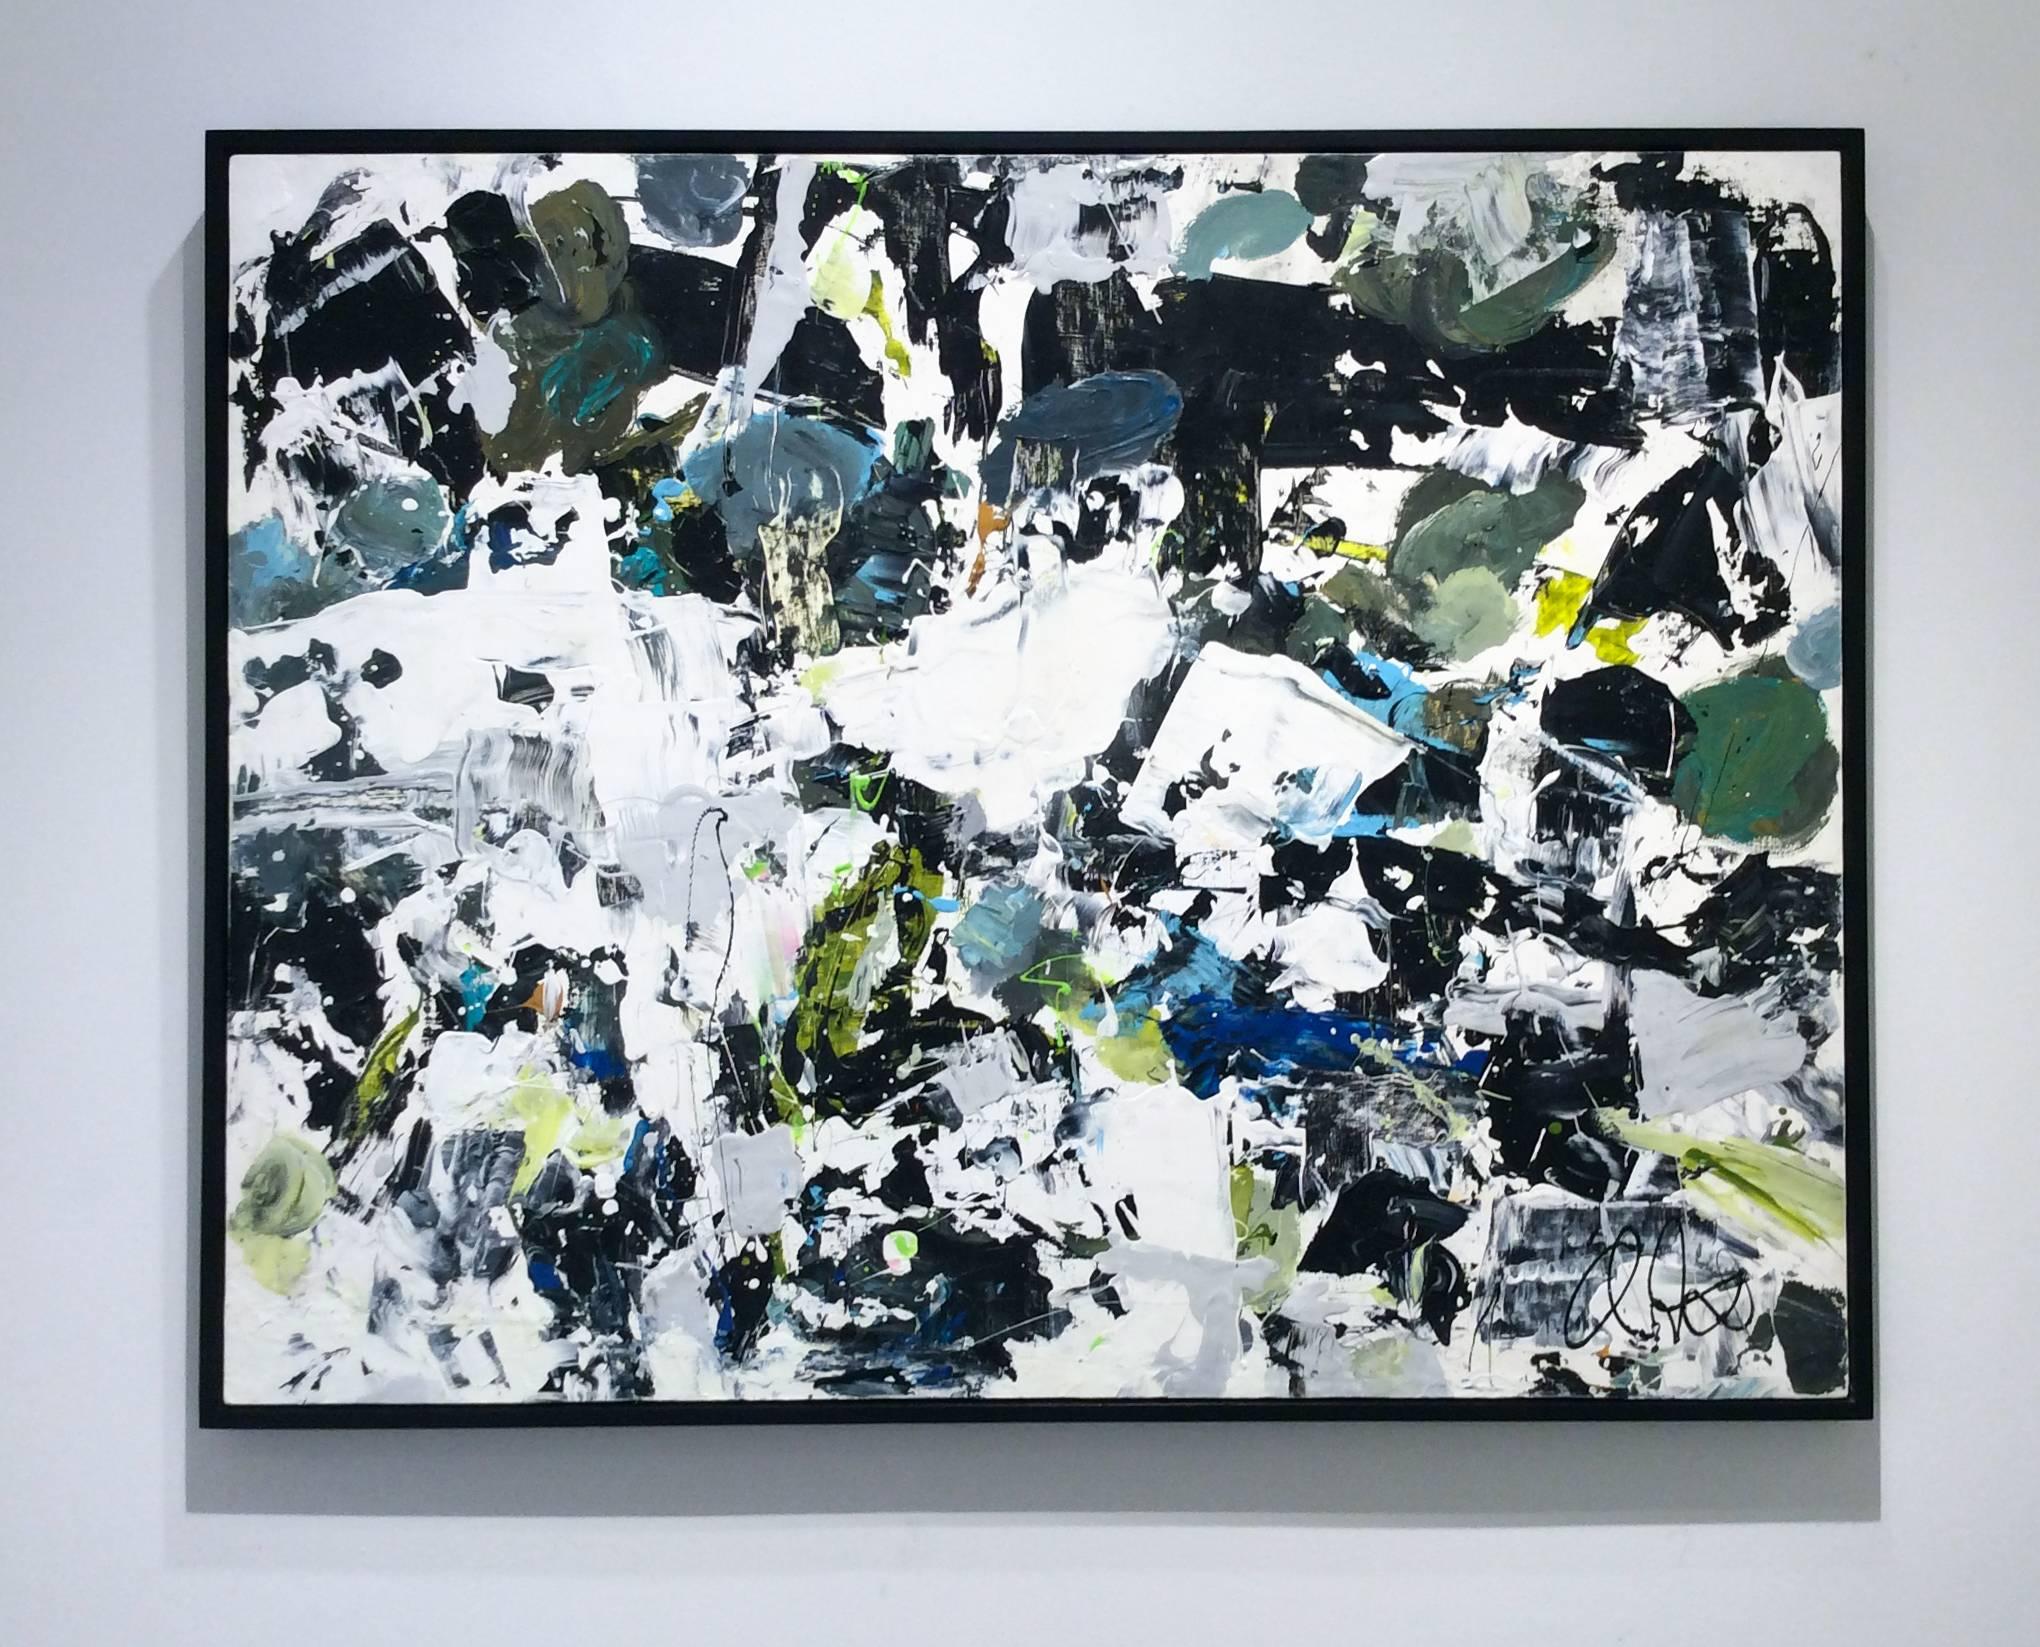 41 x 50 inches on stretched canvas, signed on front and dated on reverse
Can be hung vertically or horizontally

This contemporary abstract expressionist style painting was painted by artist, Adam Cohen in 2012. His latest body of work incorporates